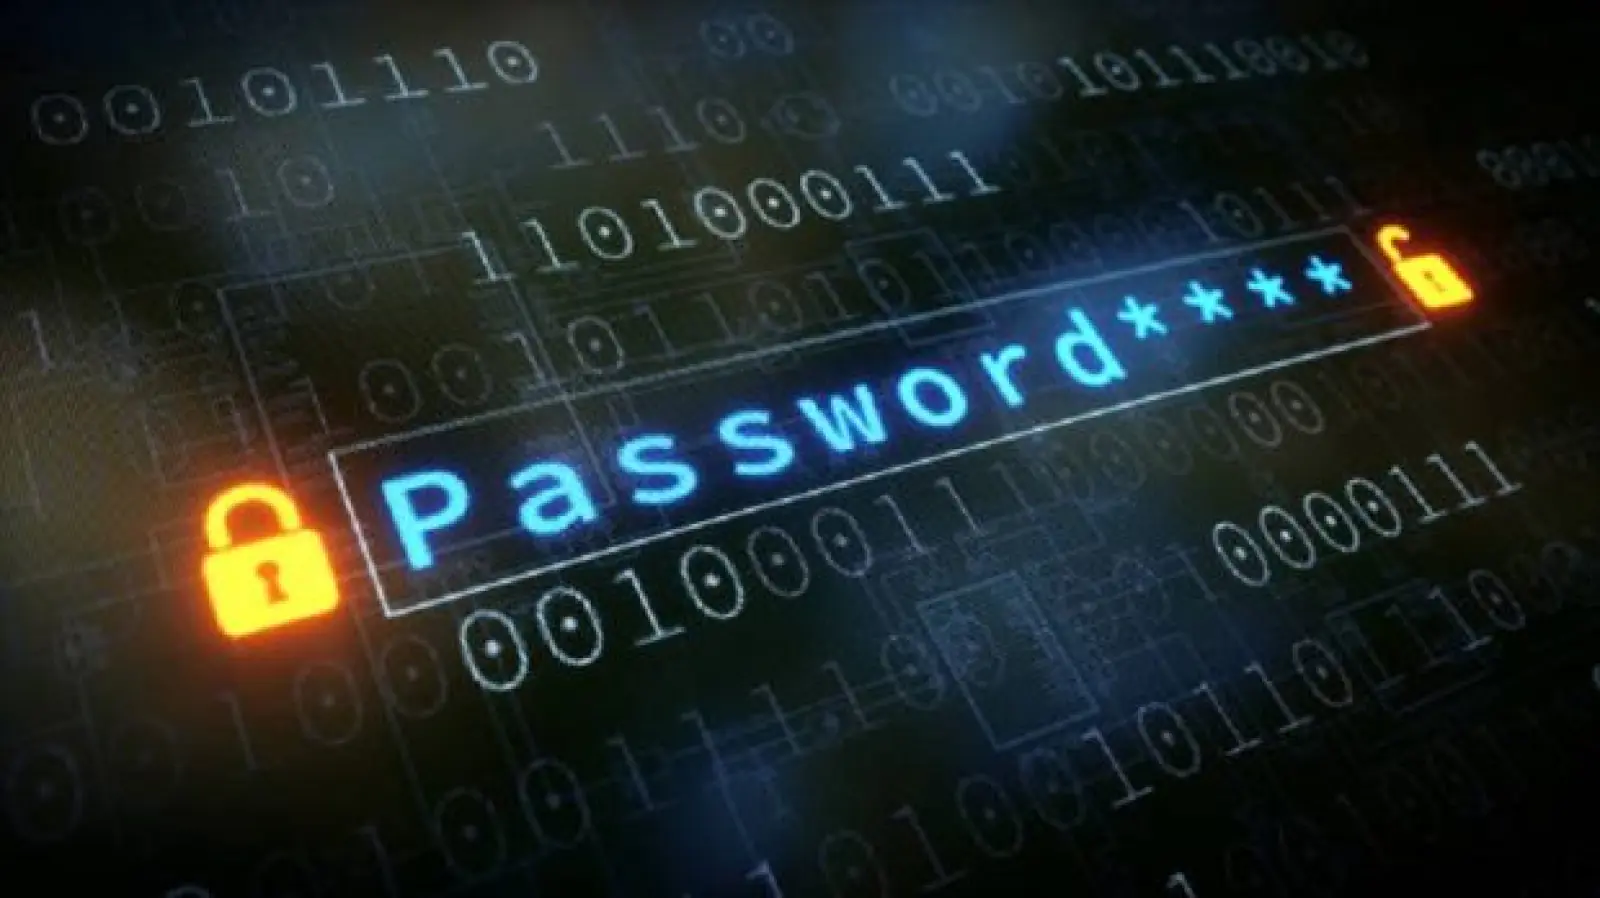 17% of Indian citizens save passwords in an insecure manner, shocking truth revealed in survey